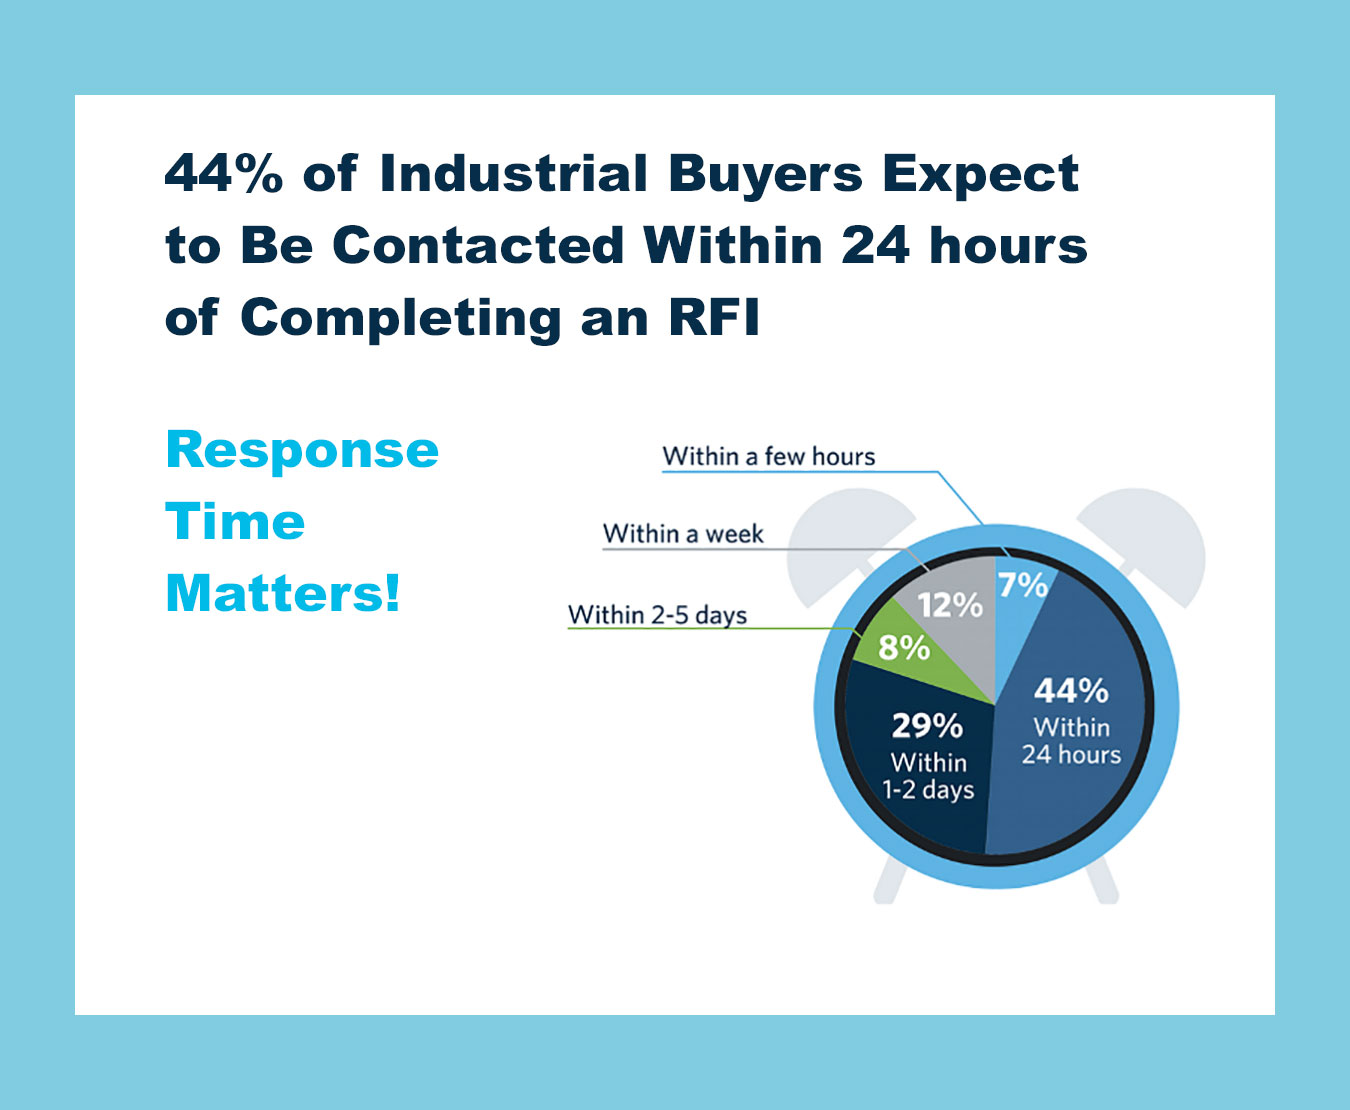 Acquire New Manufacturing Customers through speedy response times. 44% of industrial buyers expect a response to an RFI within 24 hours. Another 29% expect a response within 1 to 2 days.